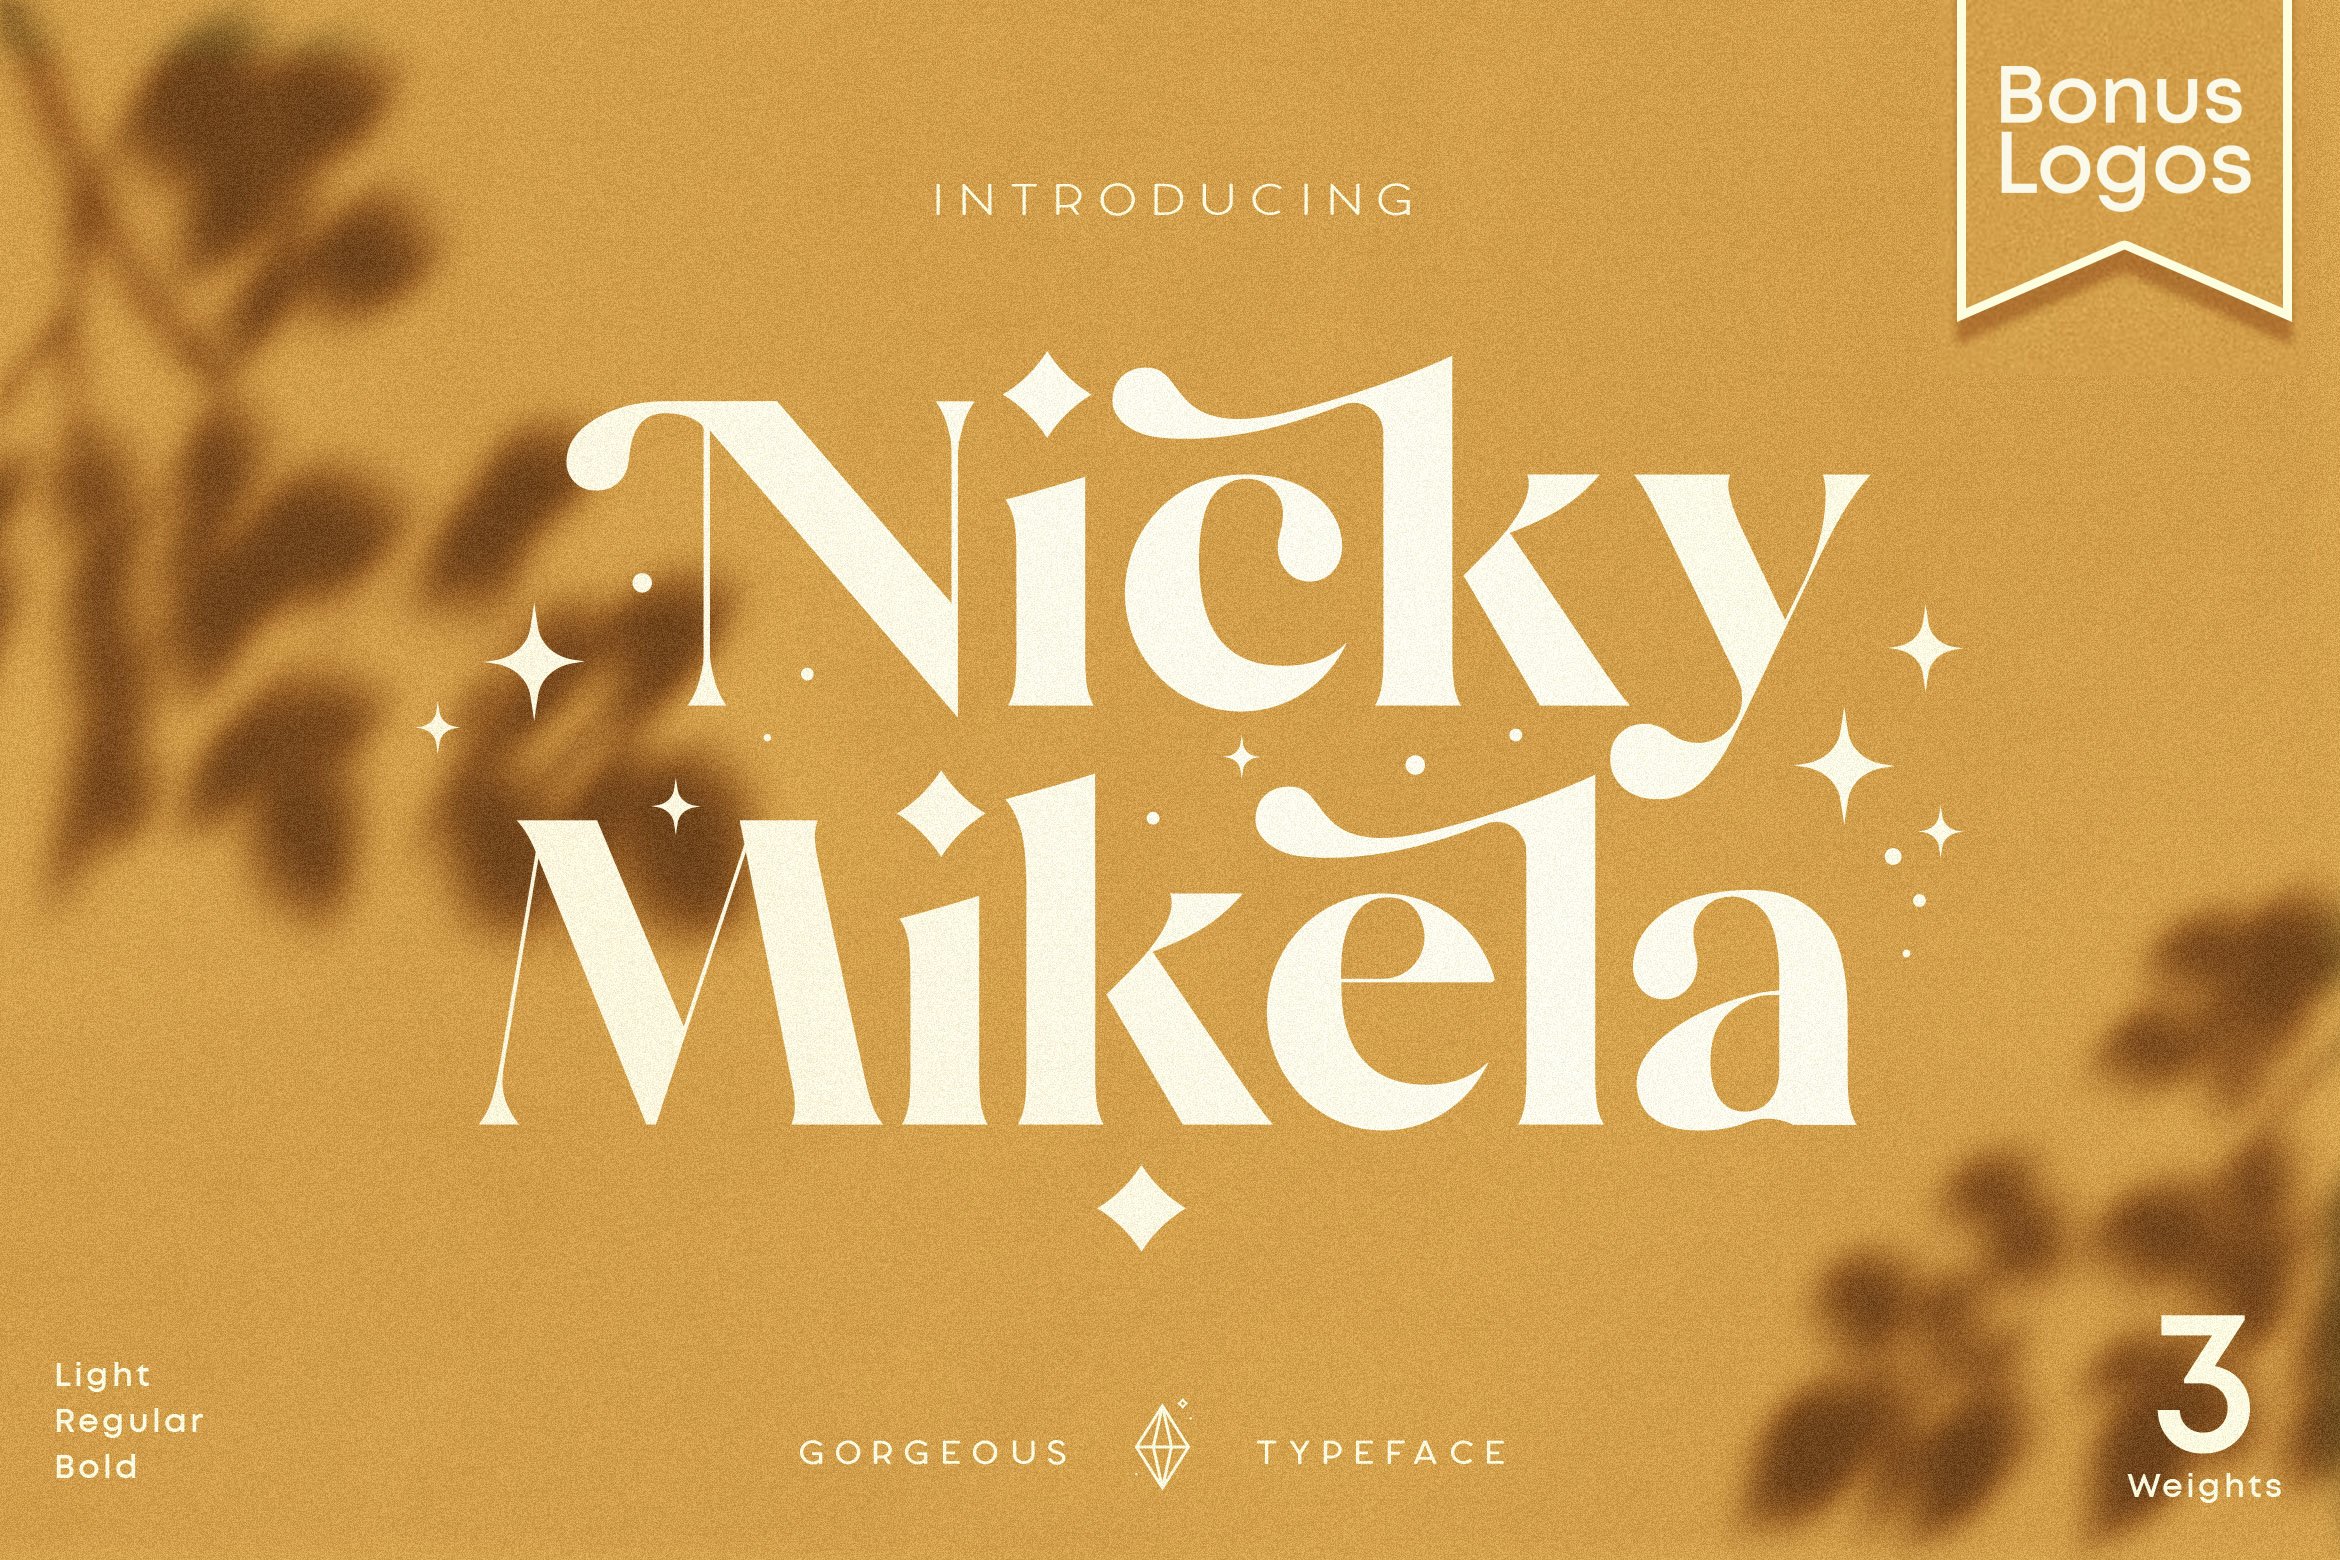 Mikela - Gorgeous Typefaces cover image.